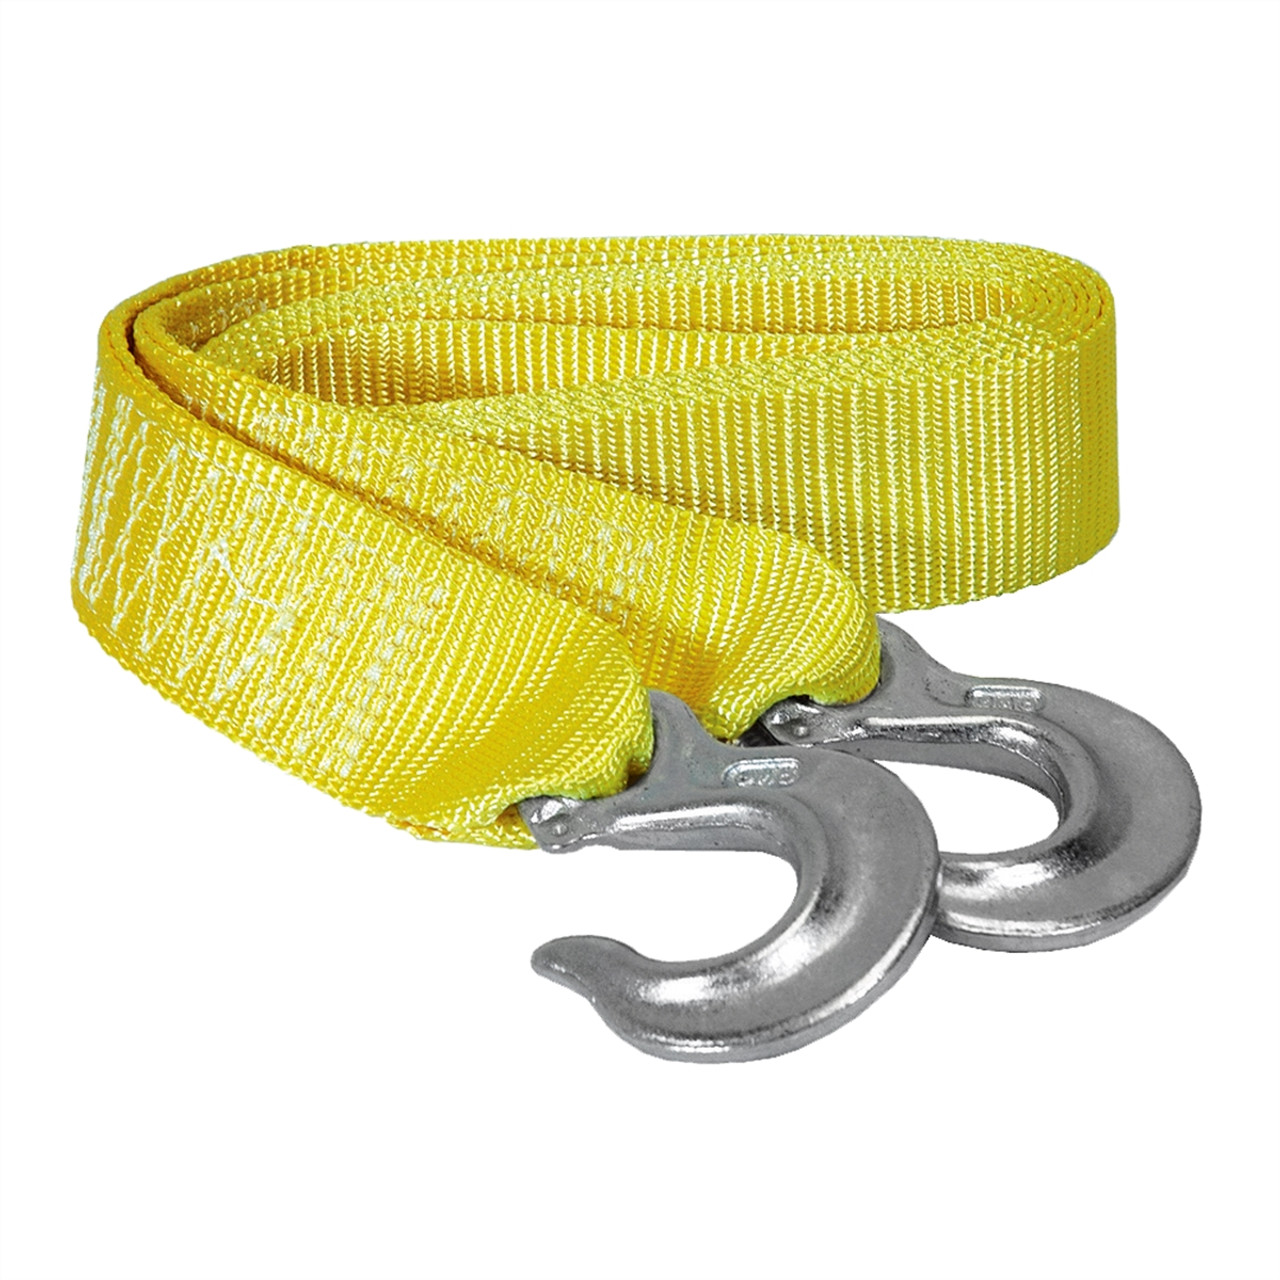  Tow Strap with Hooks 2”x20' 15,000 LBS, Tow Rope Metal